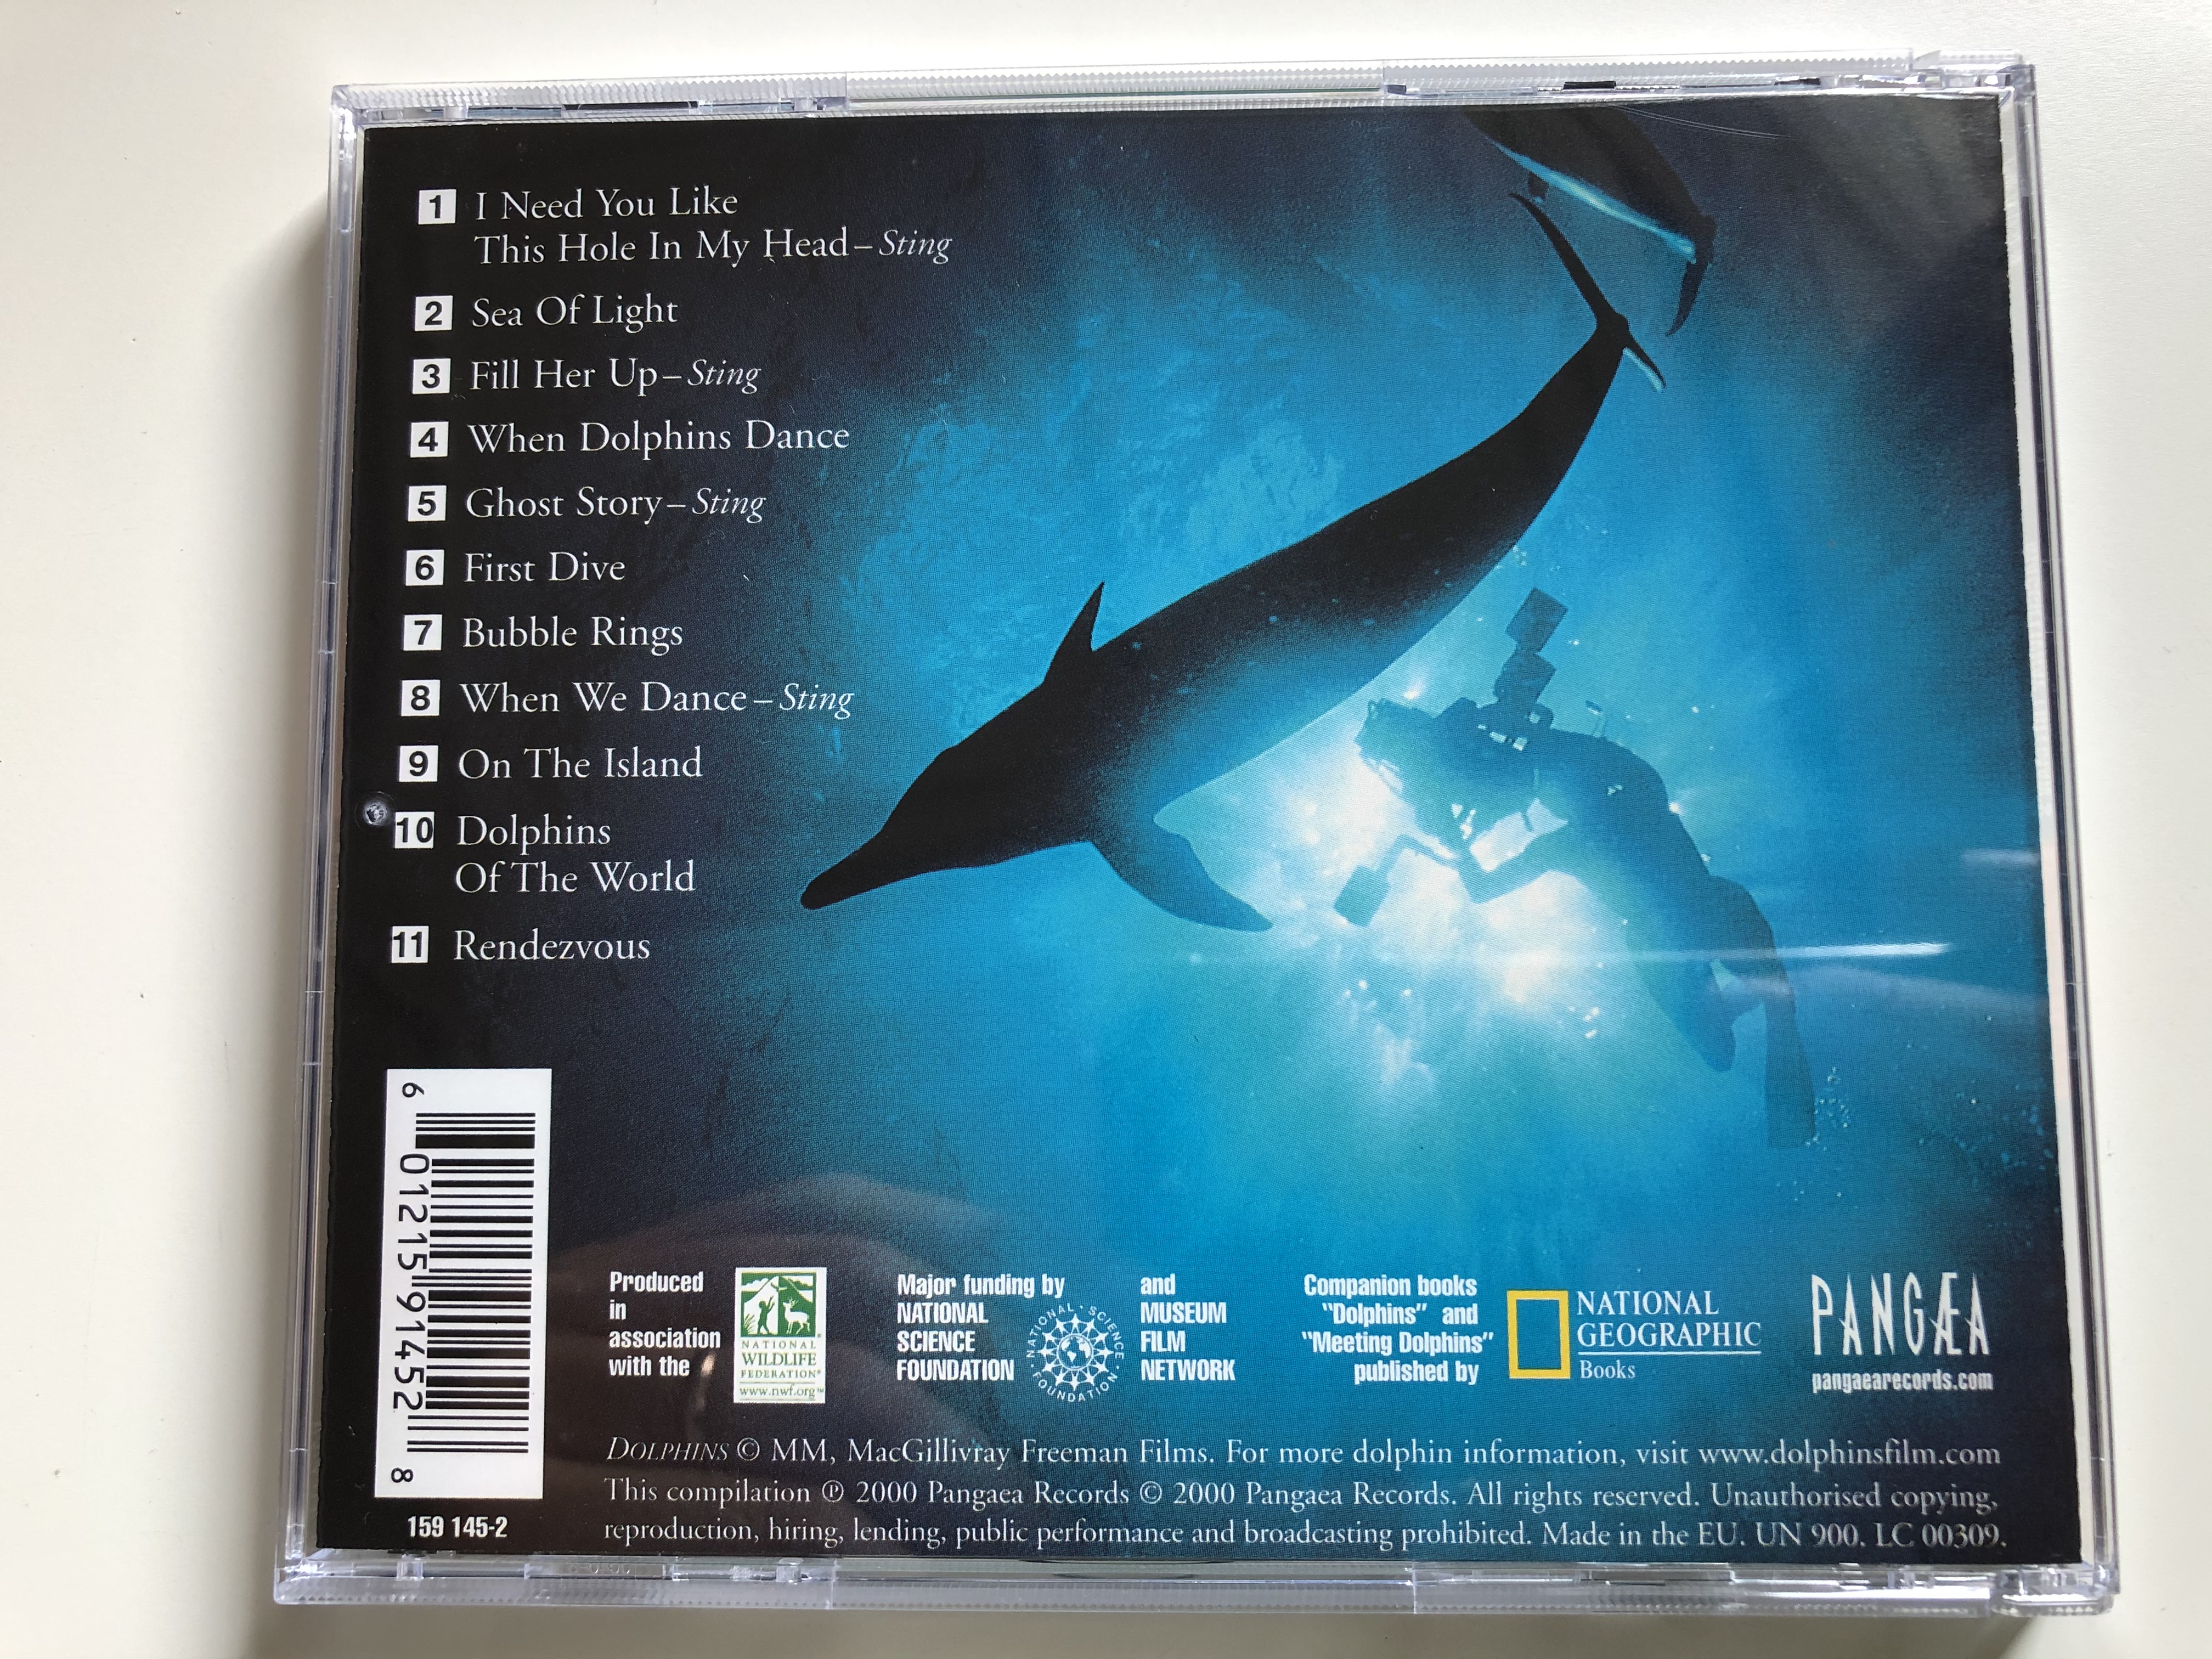 soundtrack-from-the-imax-theatre-film-dolphins-featuring-the-music-of-sting-original-score-arrangements-by-steve-wood-a-macgillivray-freeman-film-pang-a-audio-cd-2000-159-145-2-11-.jpg